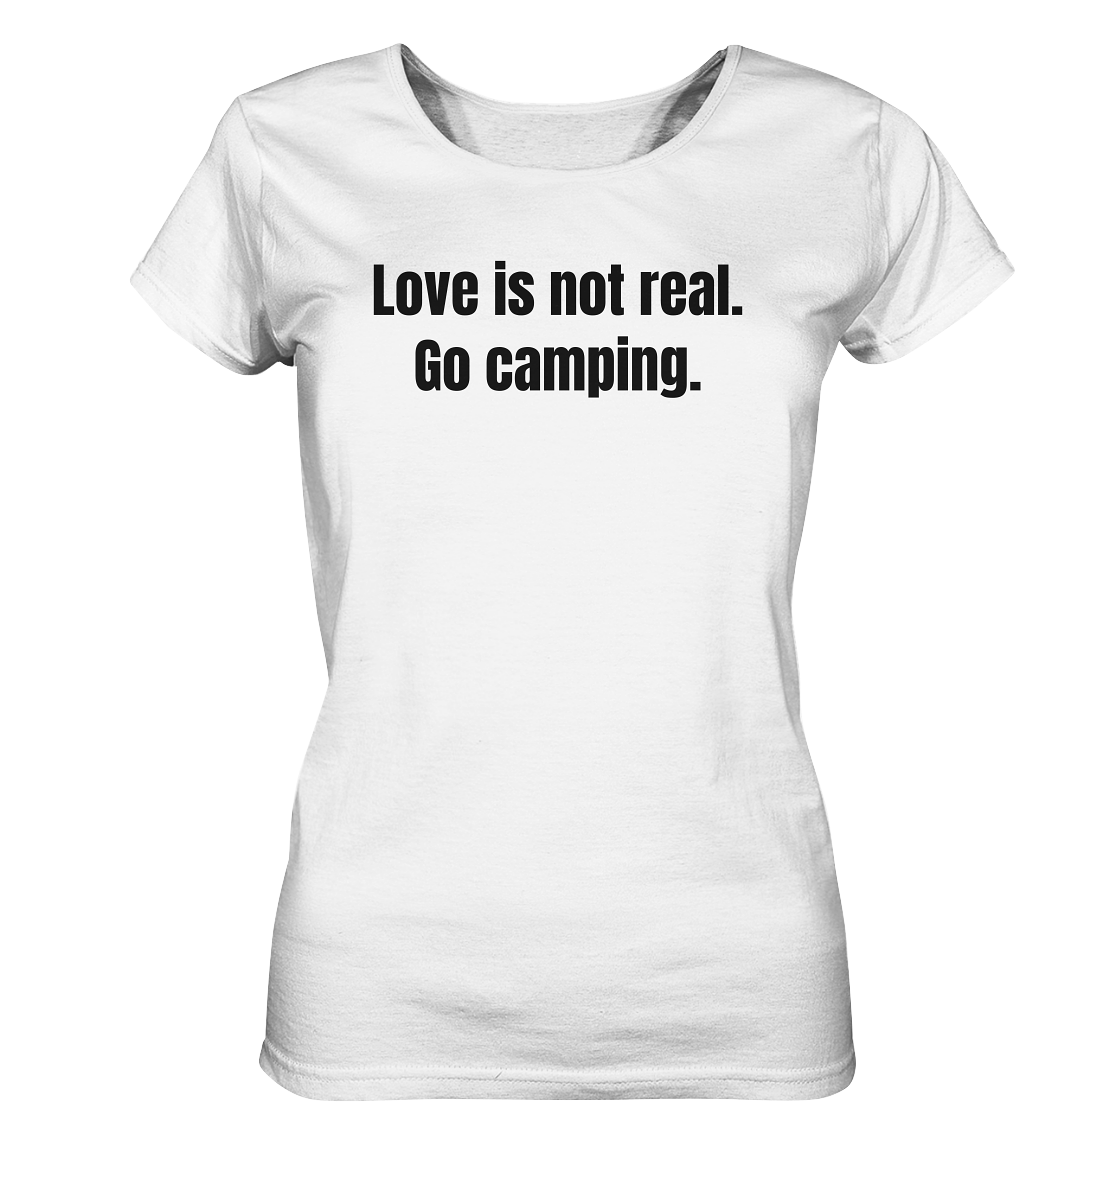 Love is not real. Go camping. - Ladies Organic Shirt